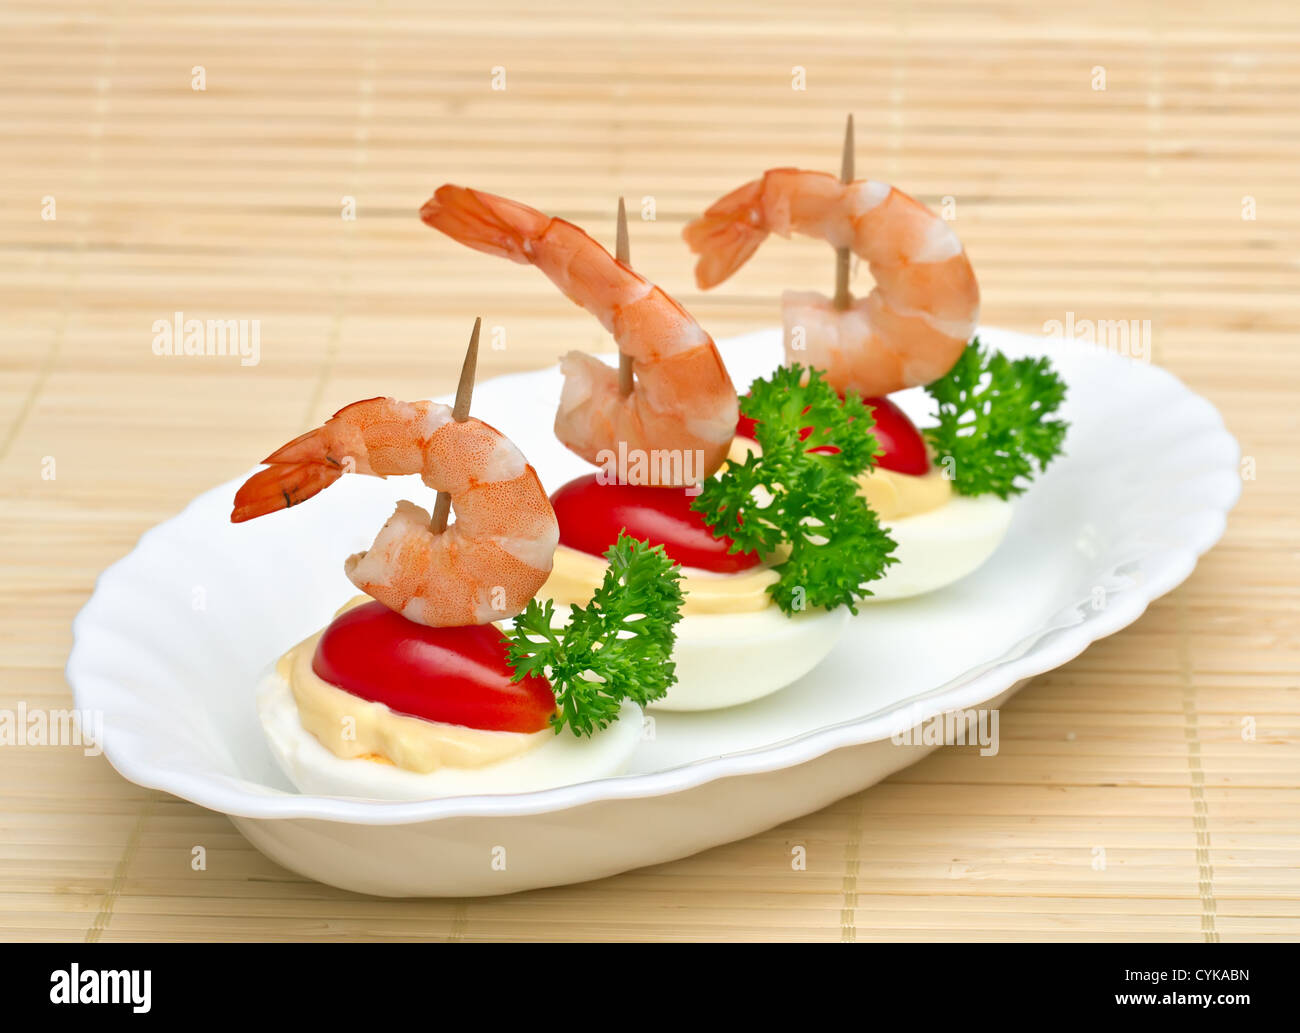 Canape with egg and a shrimp Stock Photo - Alamy